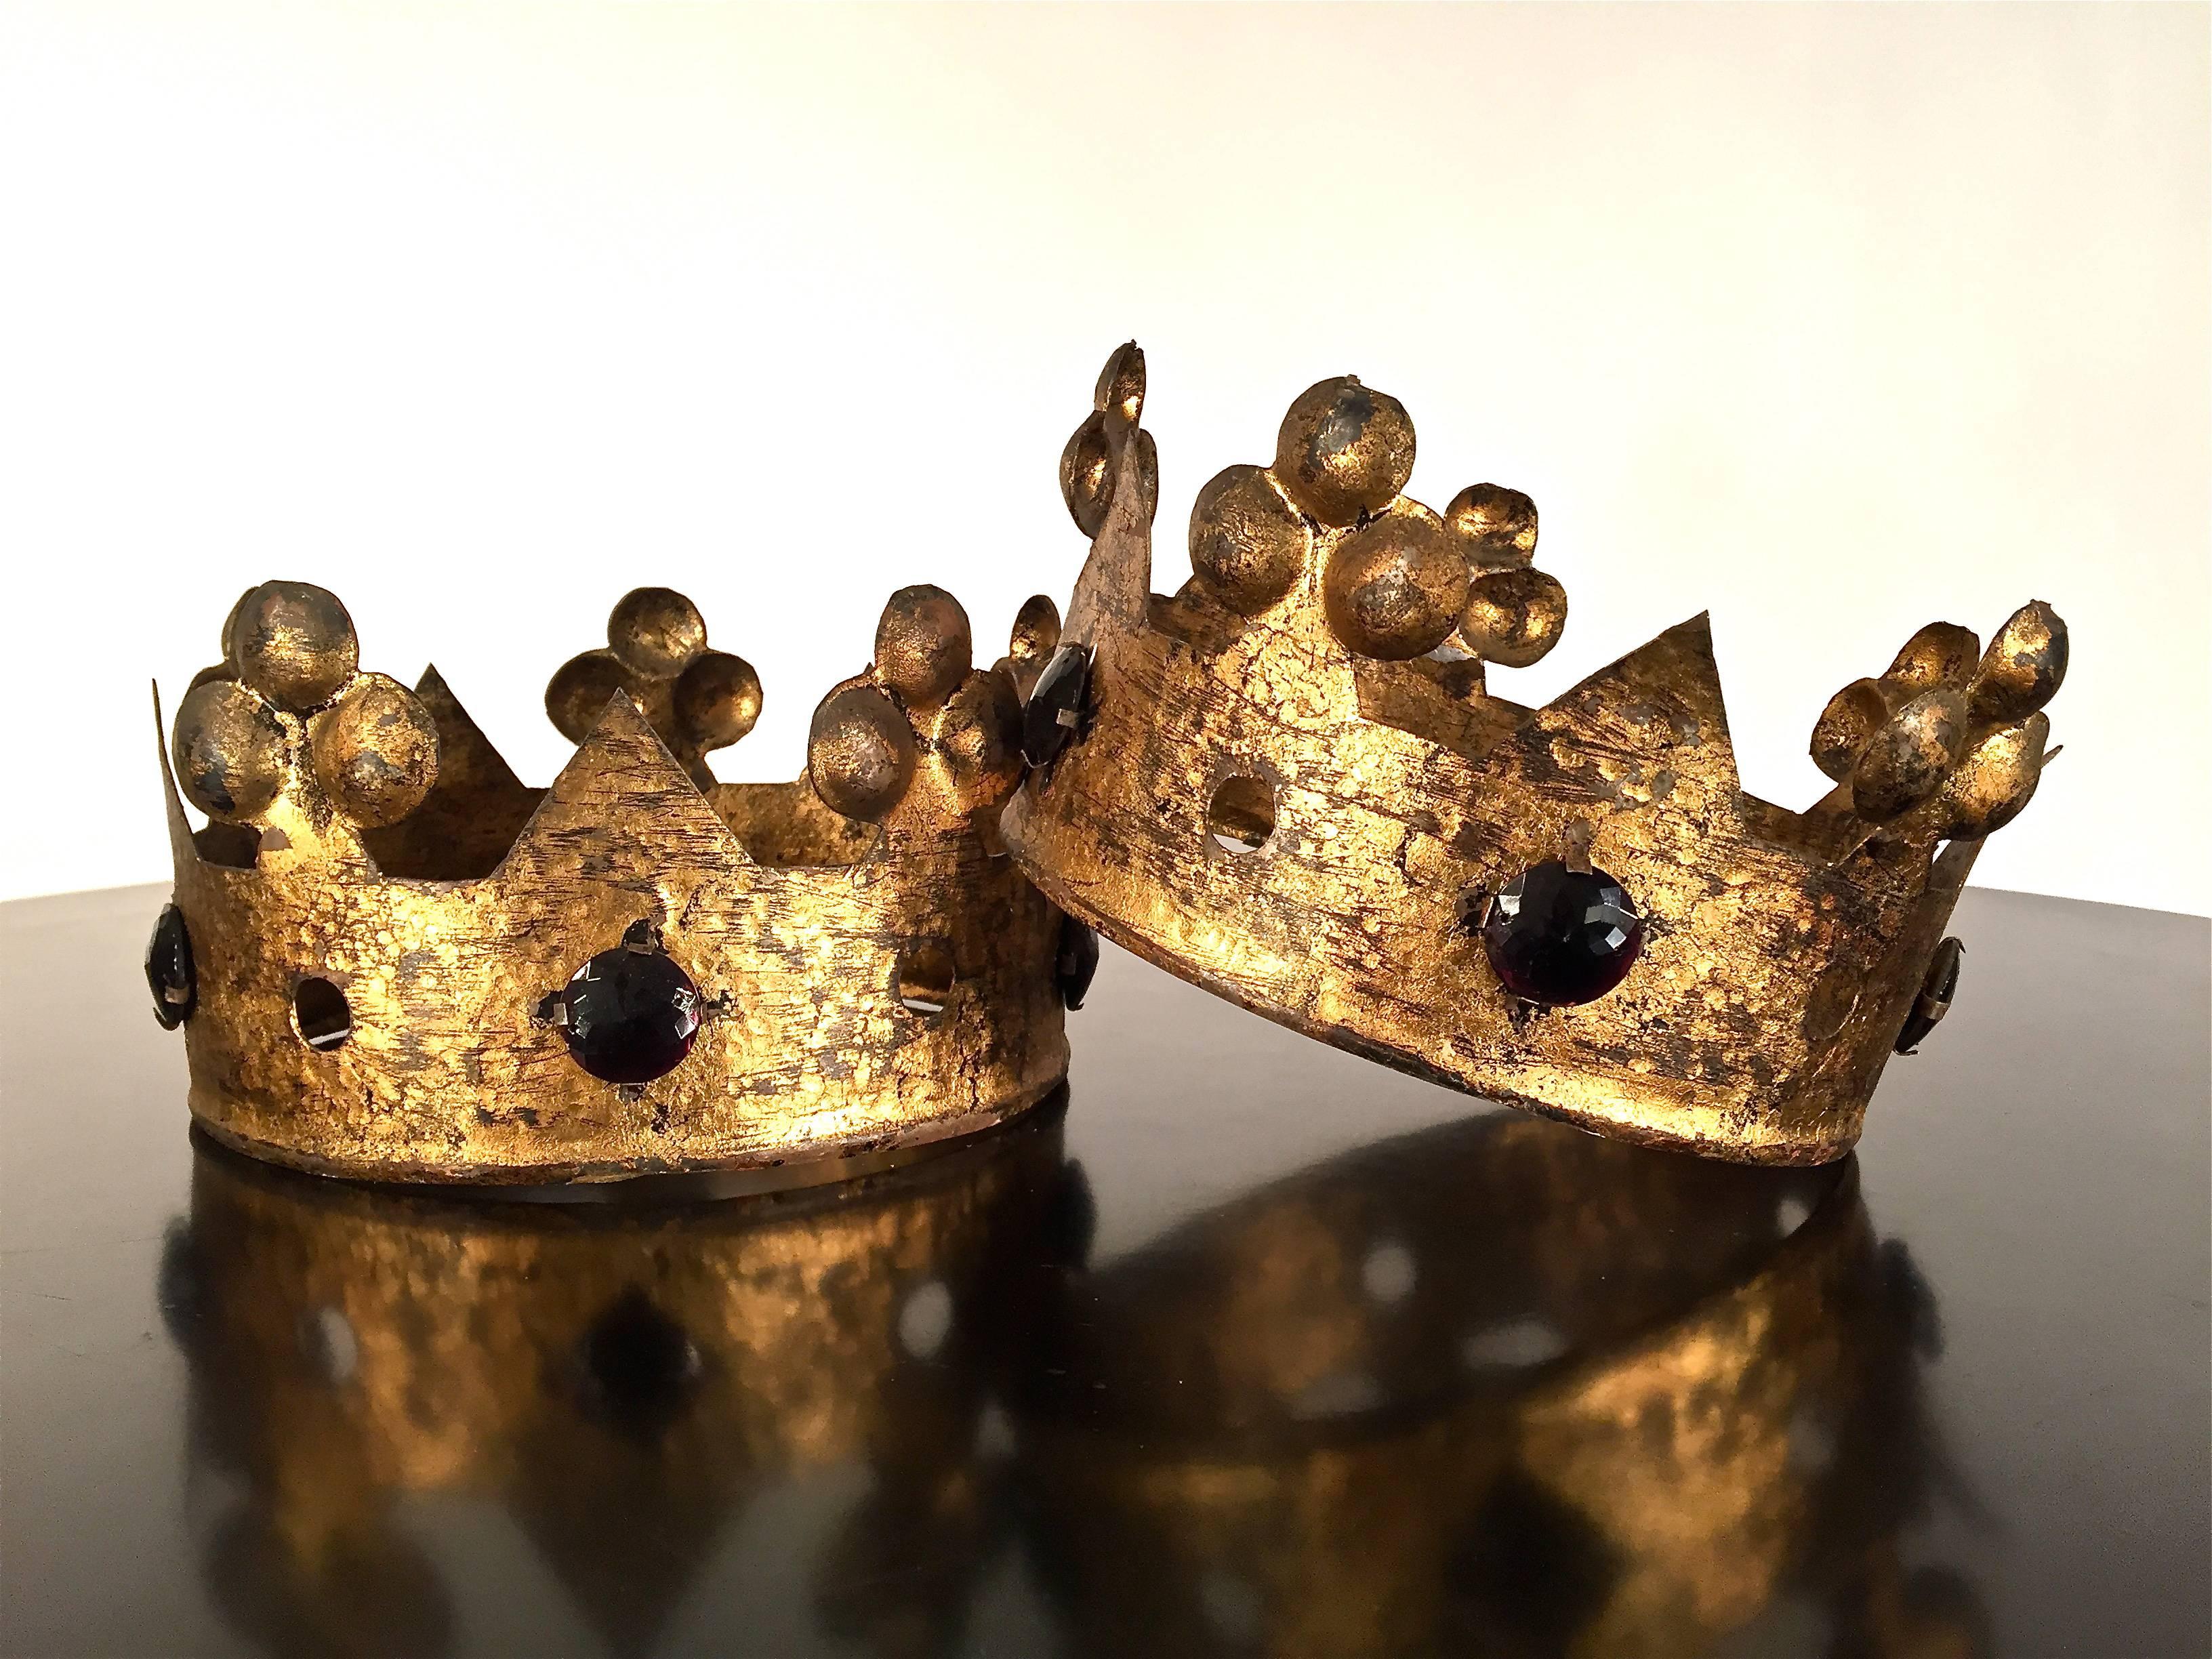 Pair of gold gilt metal crowns with glass jewel decoration, Italian, 1950s.